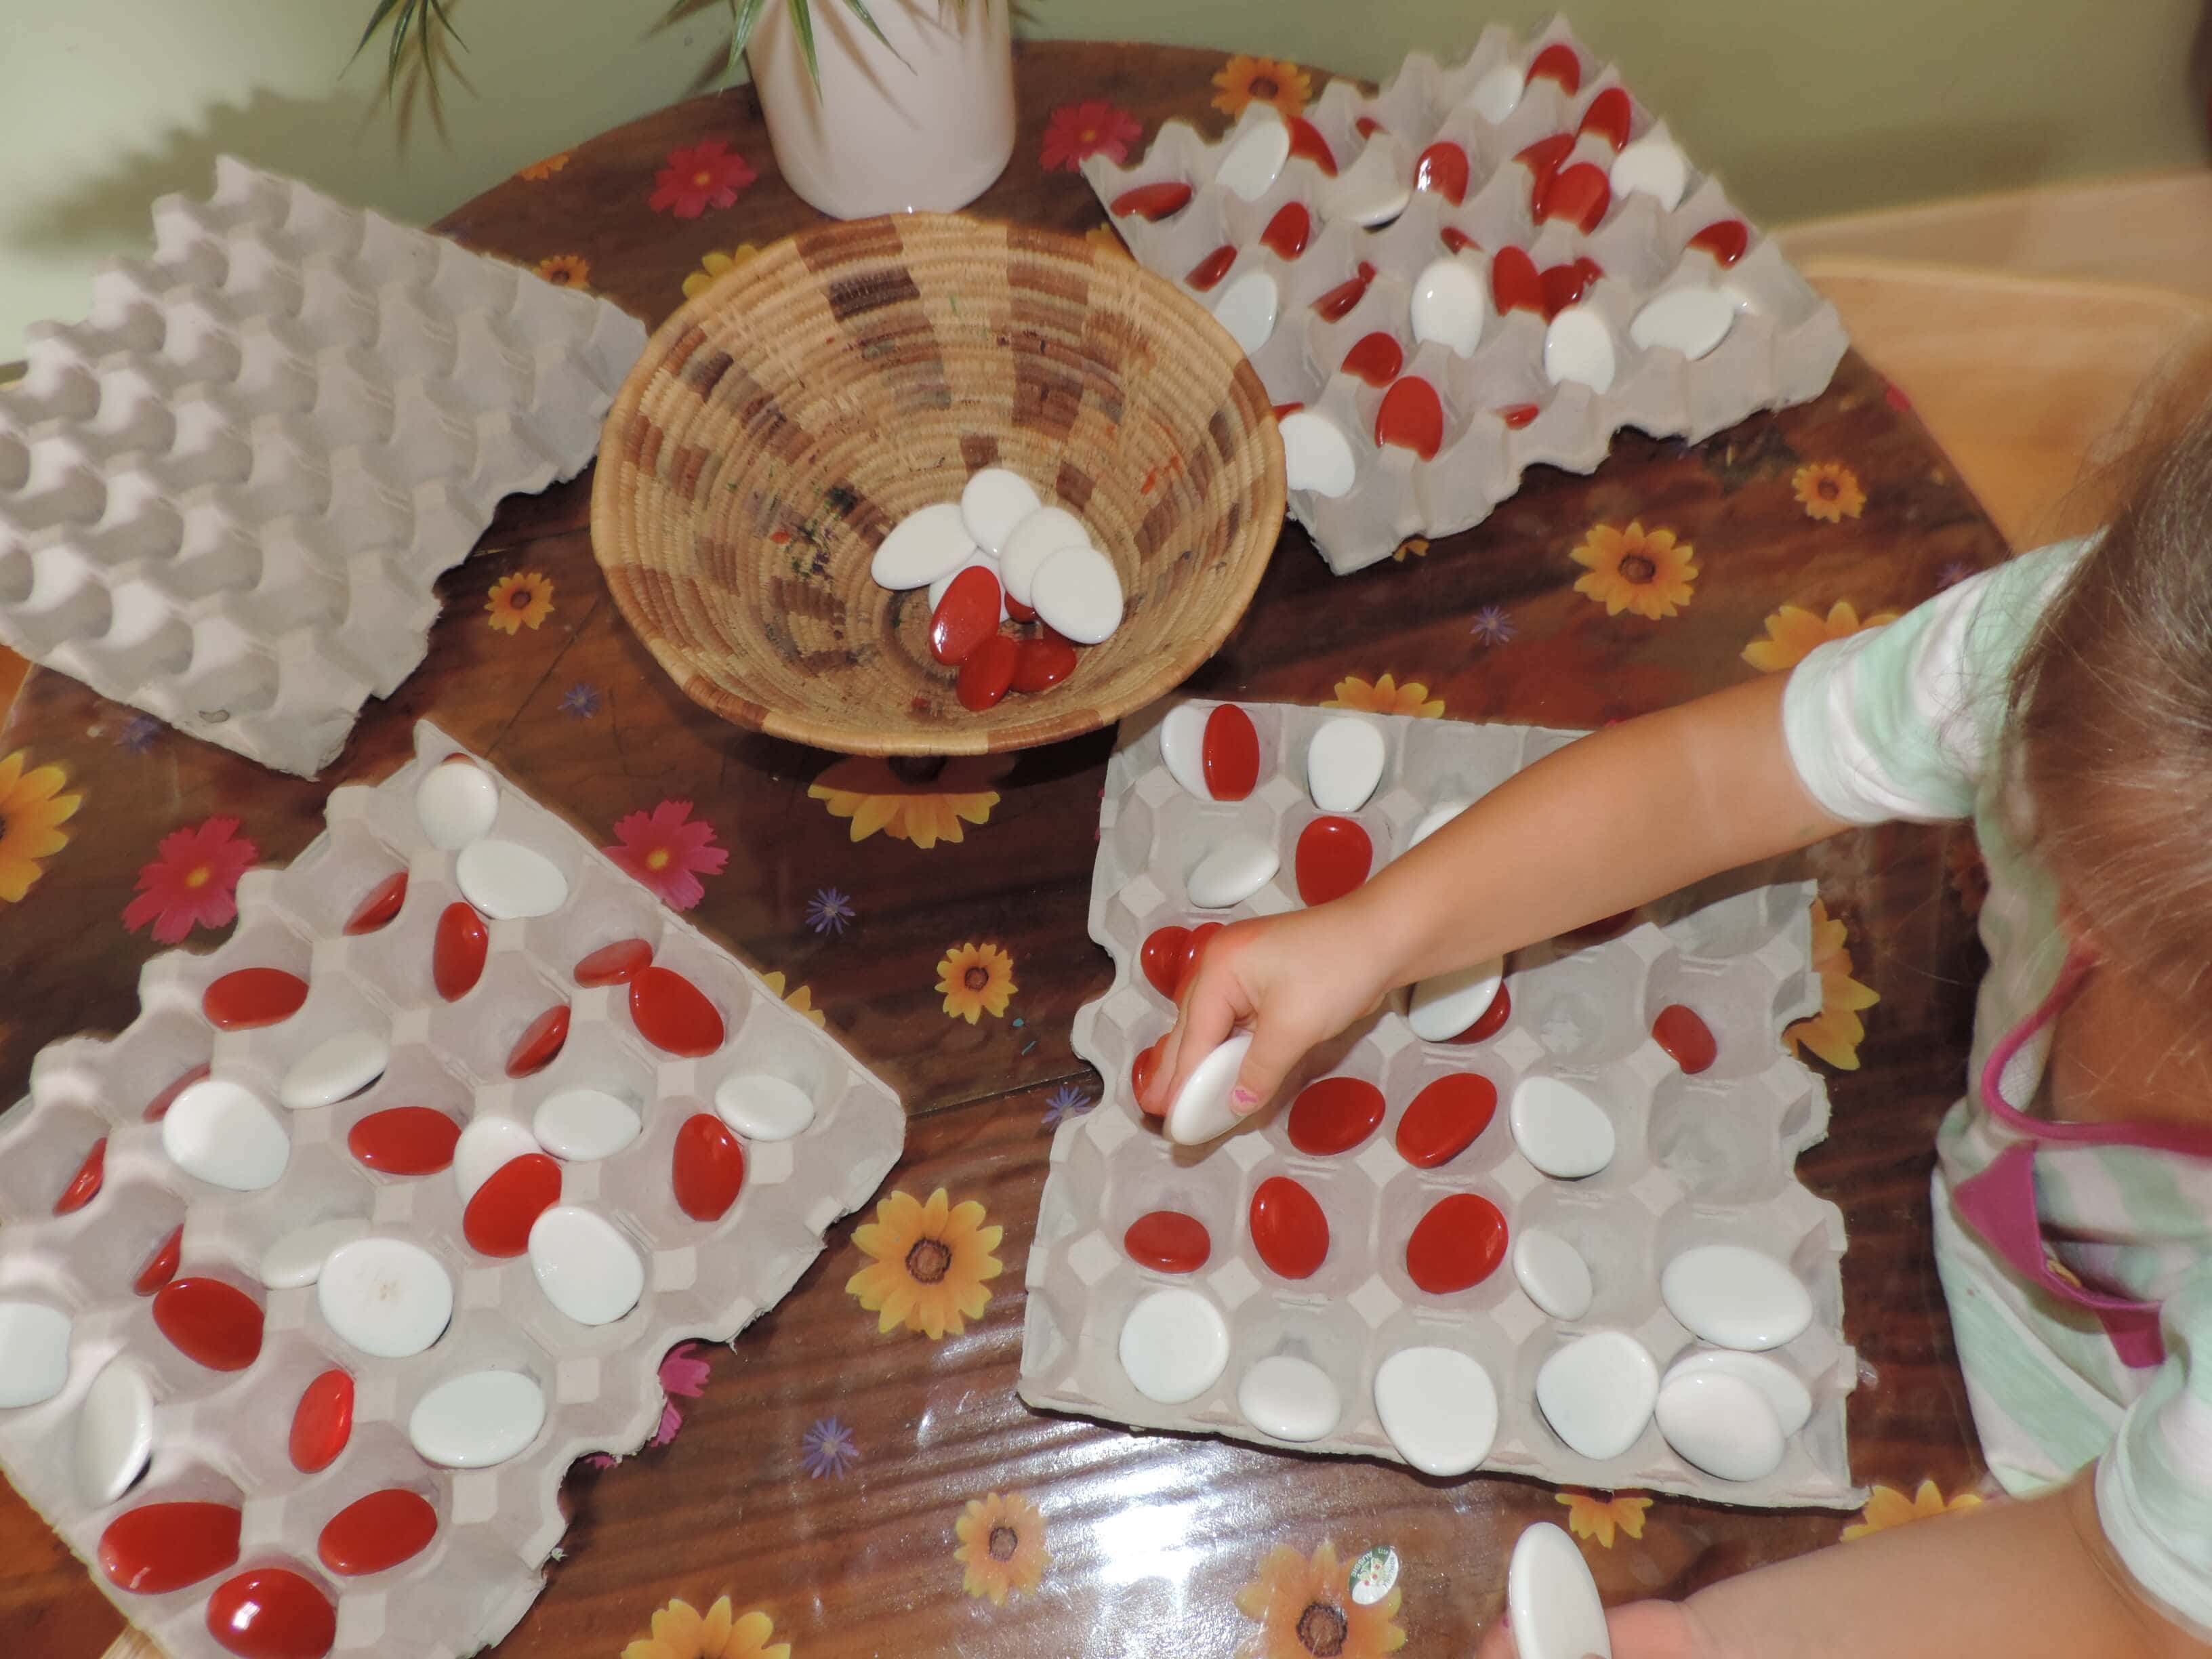 child arranging colured stones into patterns